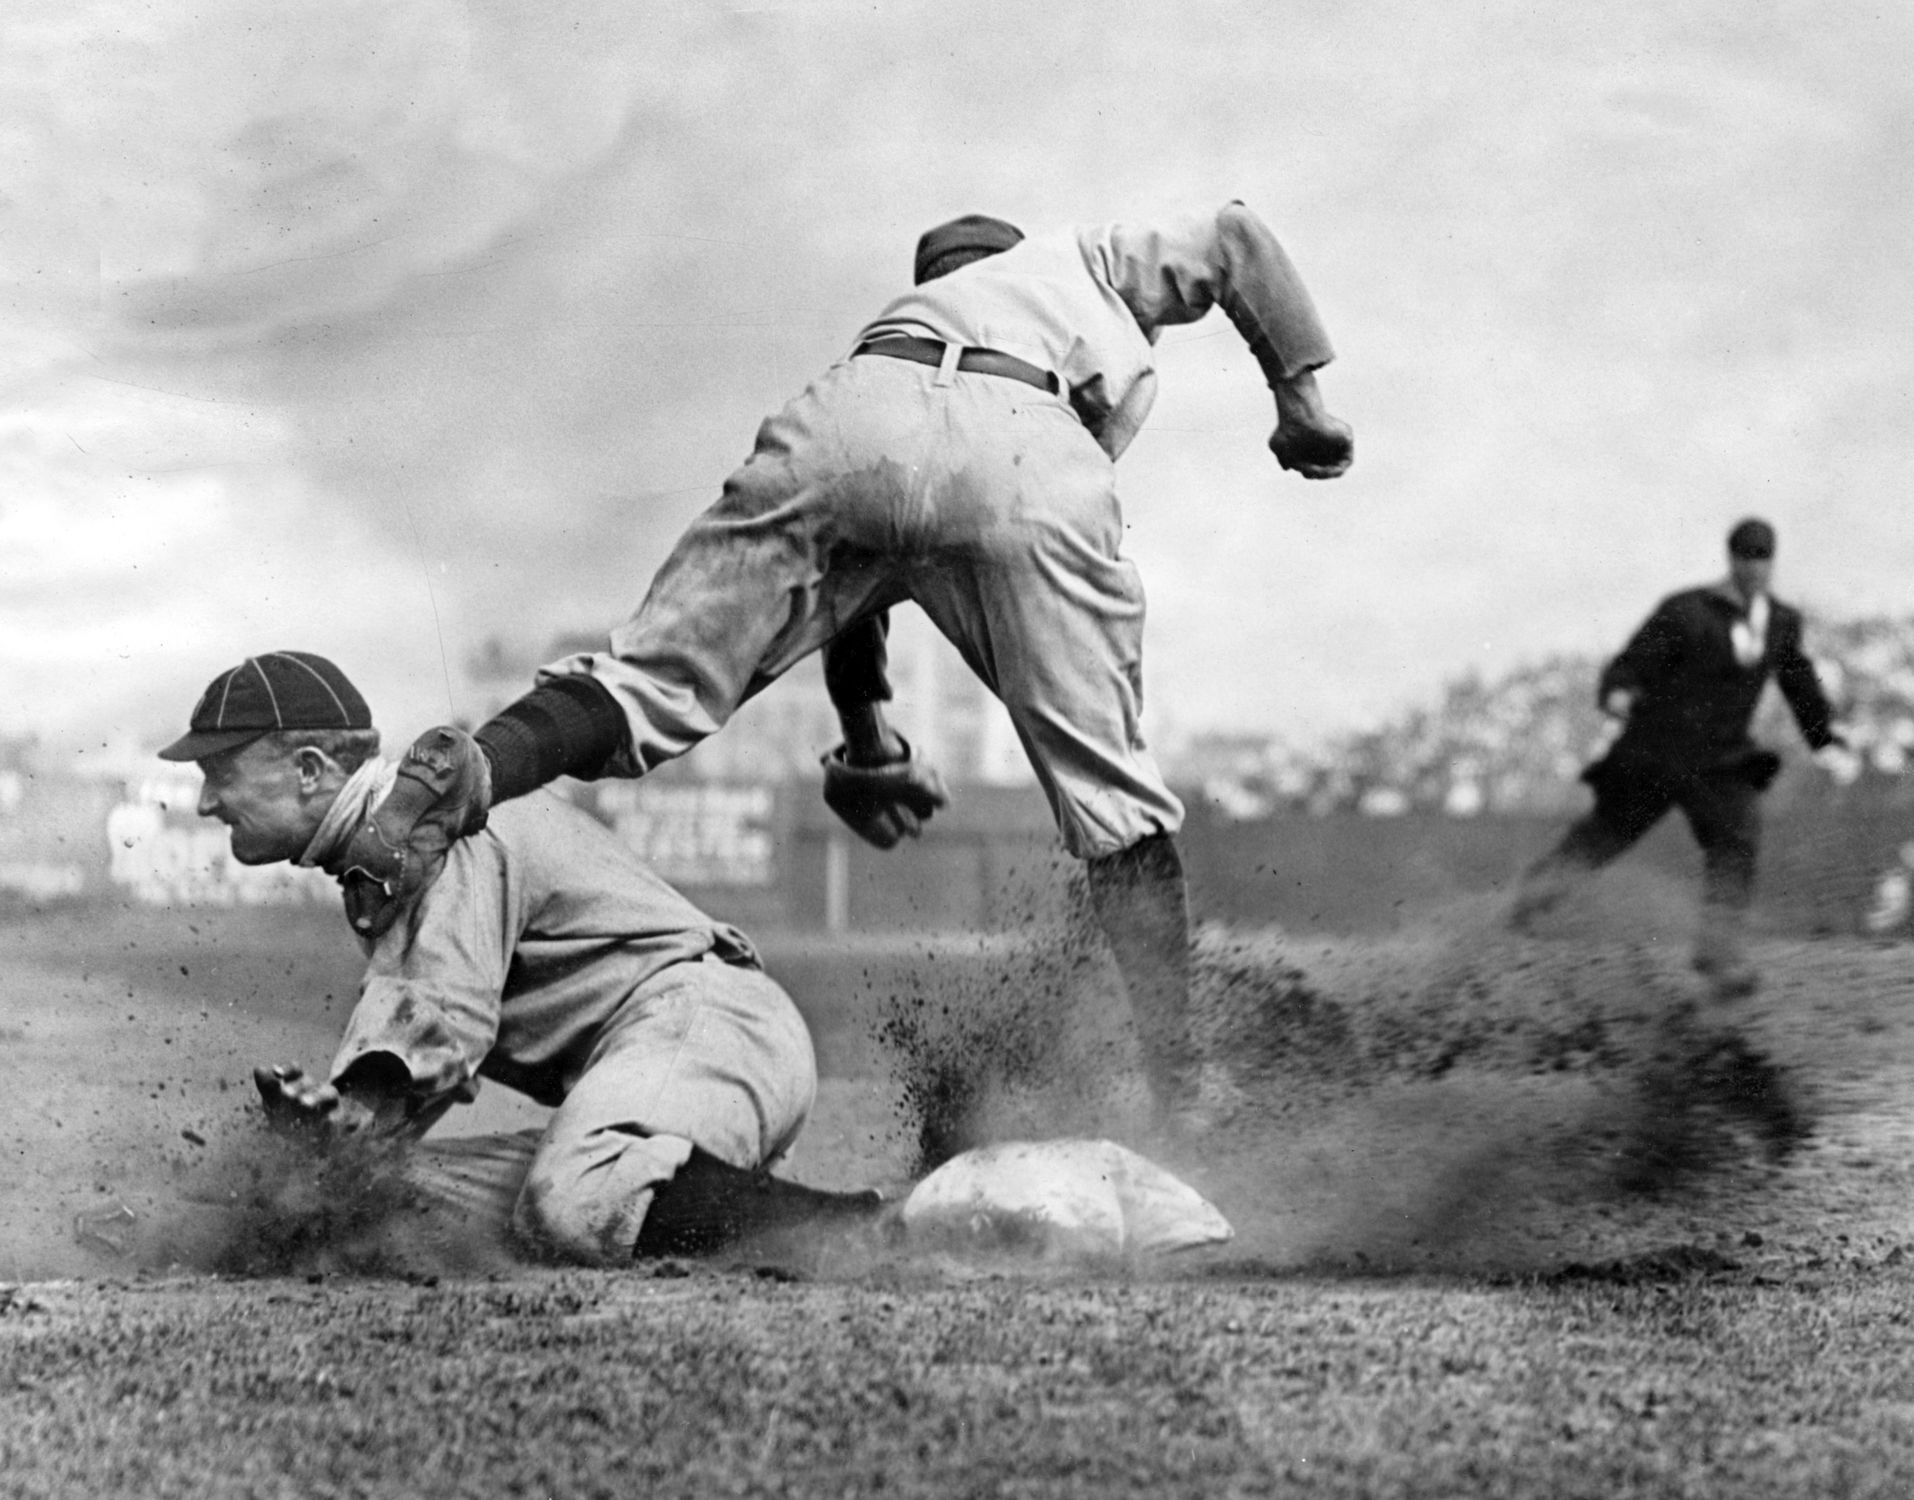 Charles Conlon's iconic photograph of Ty Cobb sliding into third base (NATIONAL BASEBALL HALL OF FAME LIBRARY)